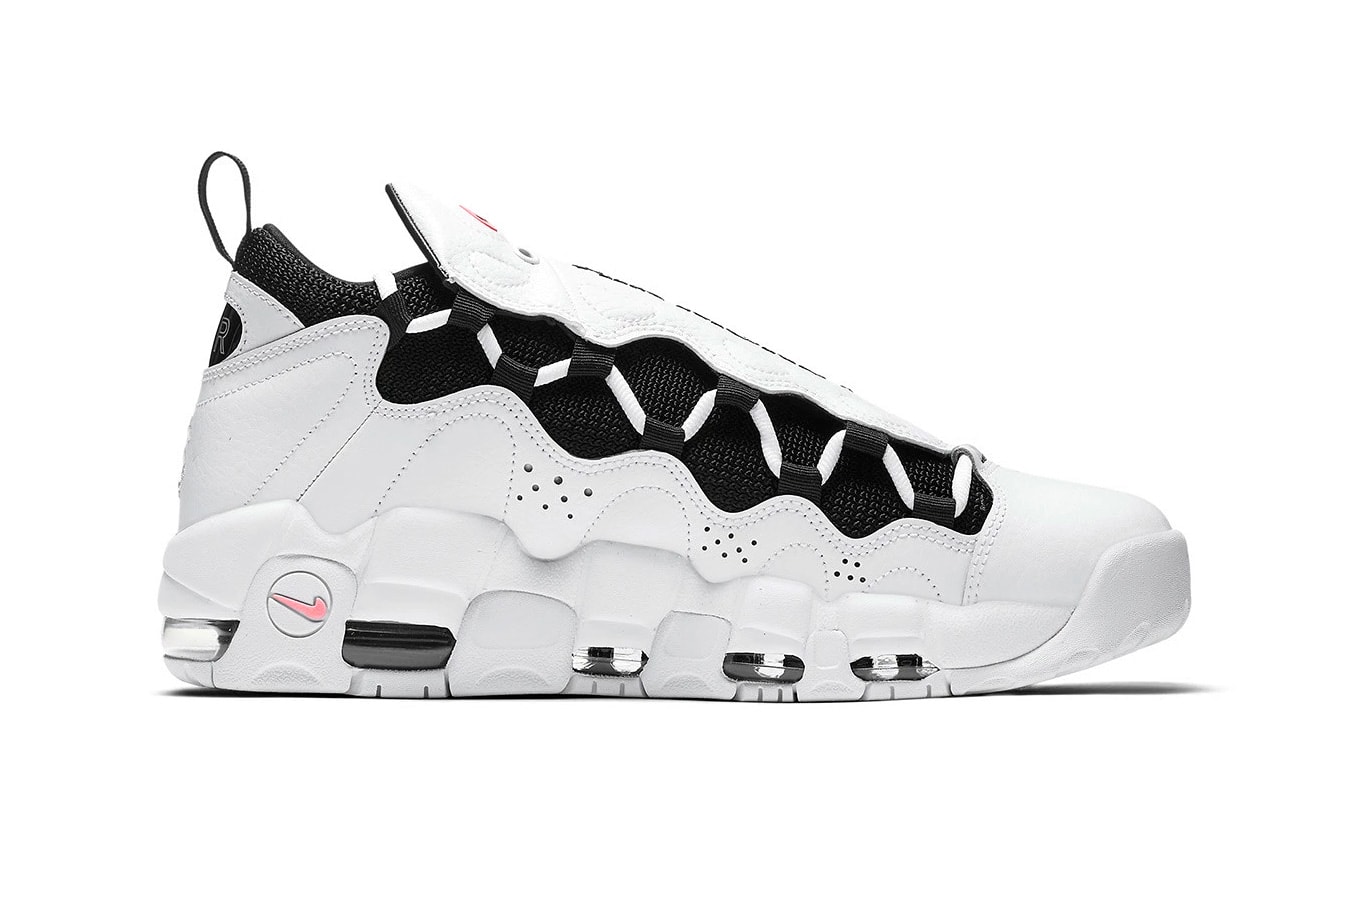 Nike Air More Money Piggy Bank Release Date sneakers price purchase white coral black